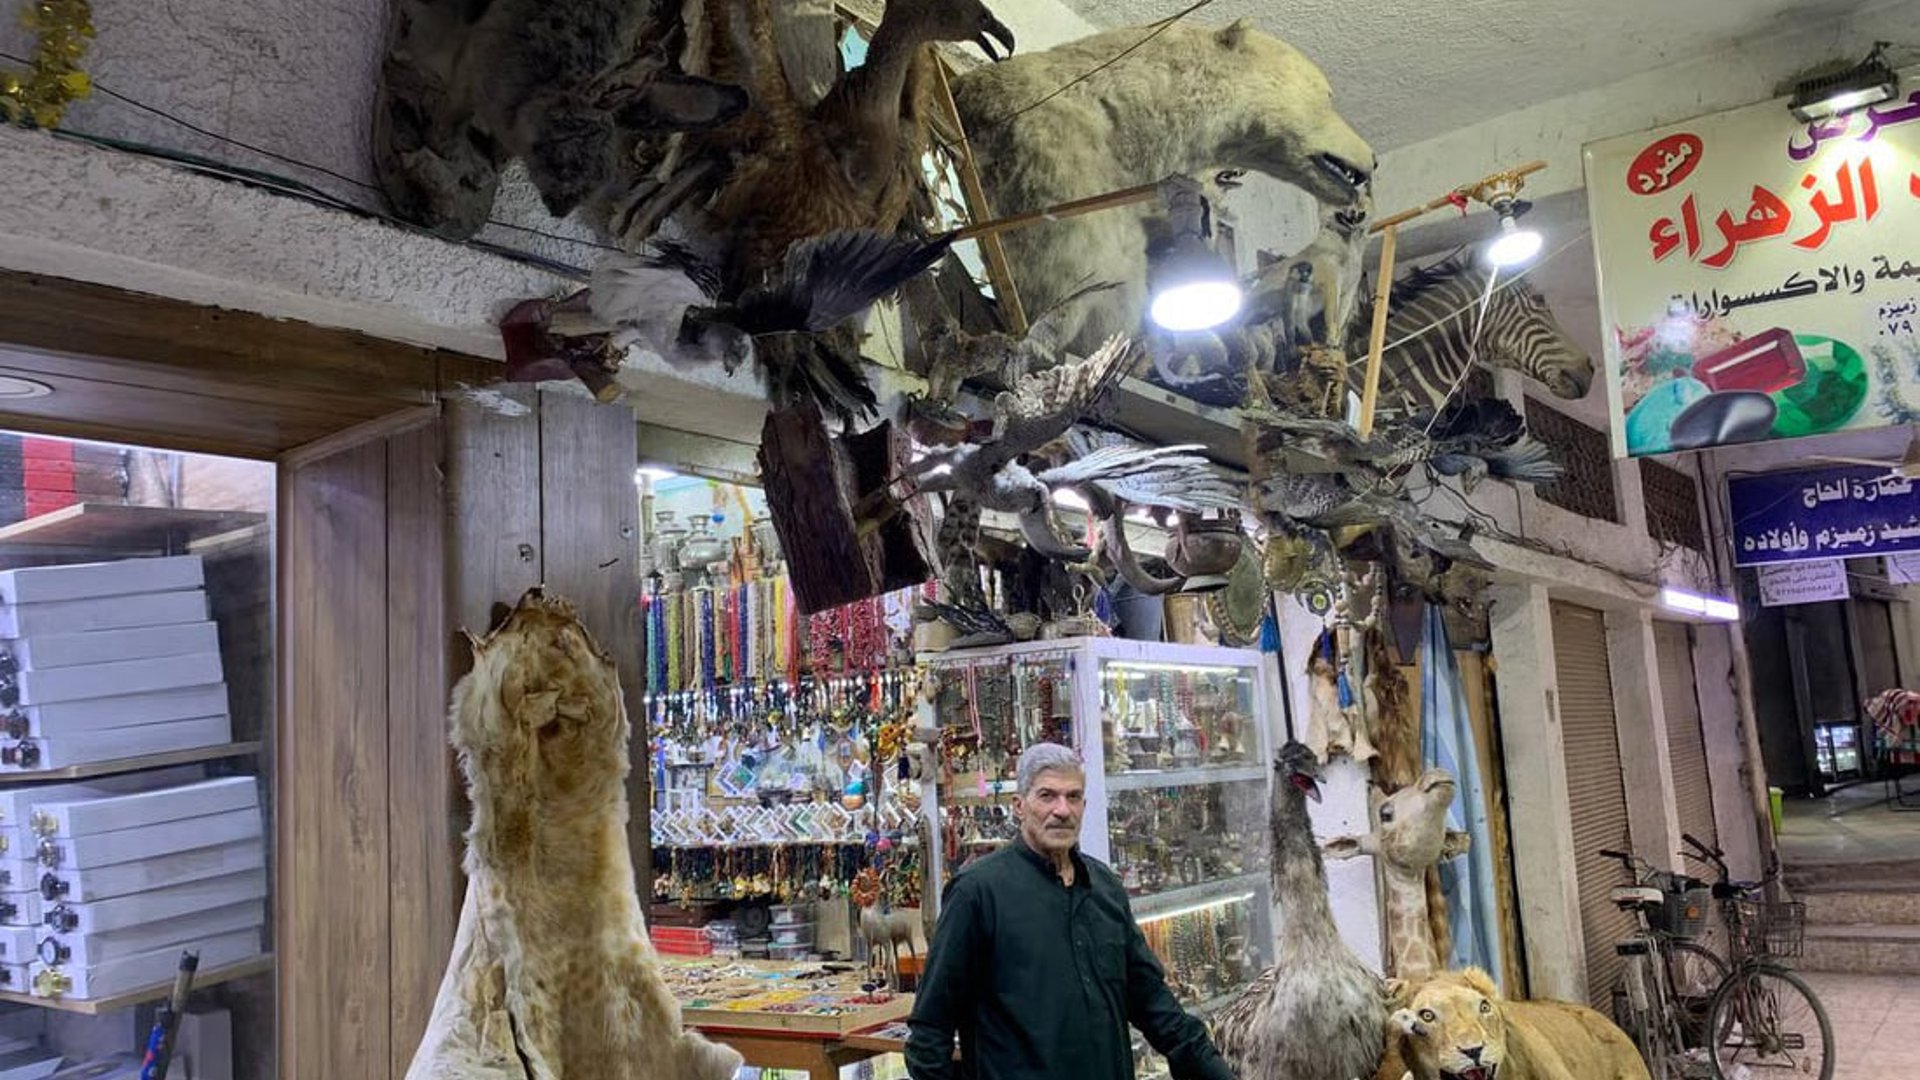 Renowned exhibition of taxidermy and antiques by Mehdi AlKarbalai